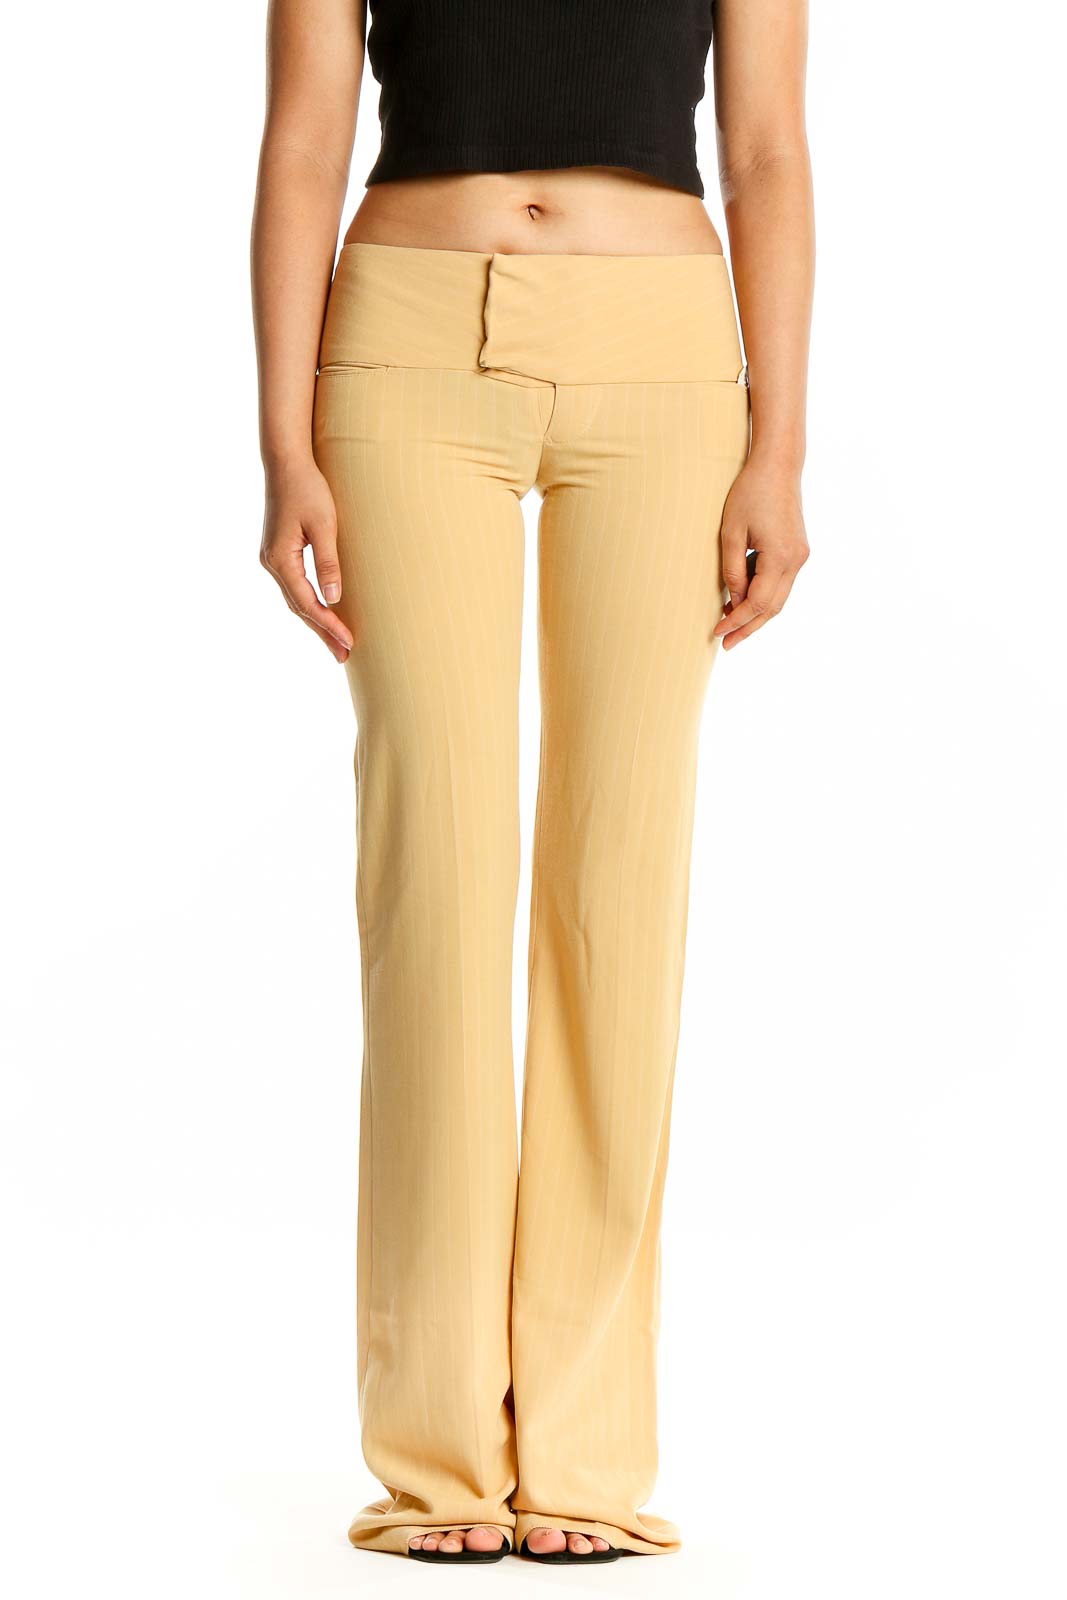 Beige Full Length Casual Trouser Front